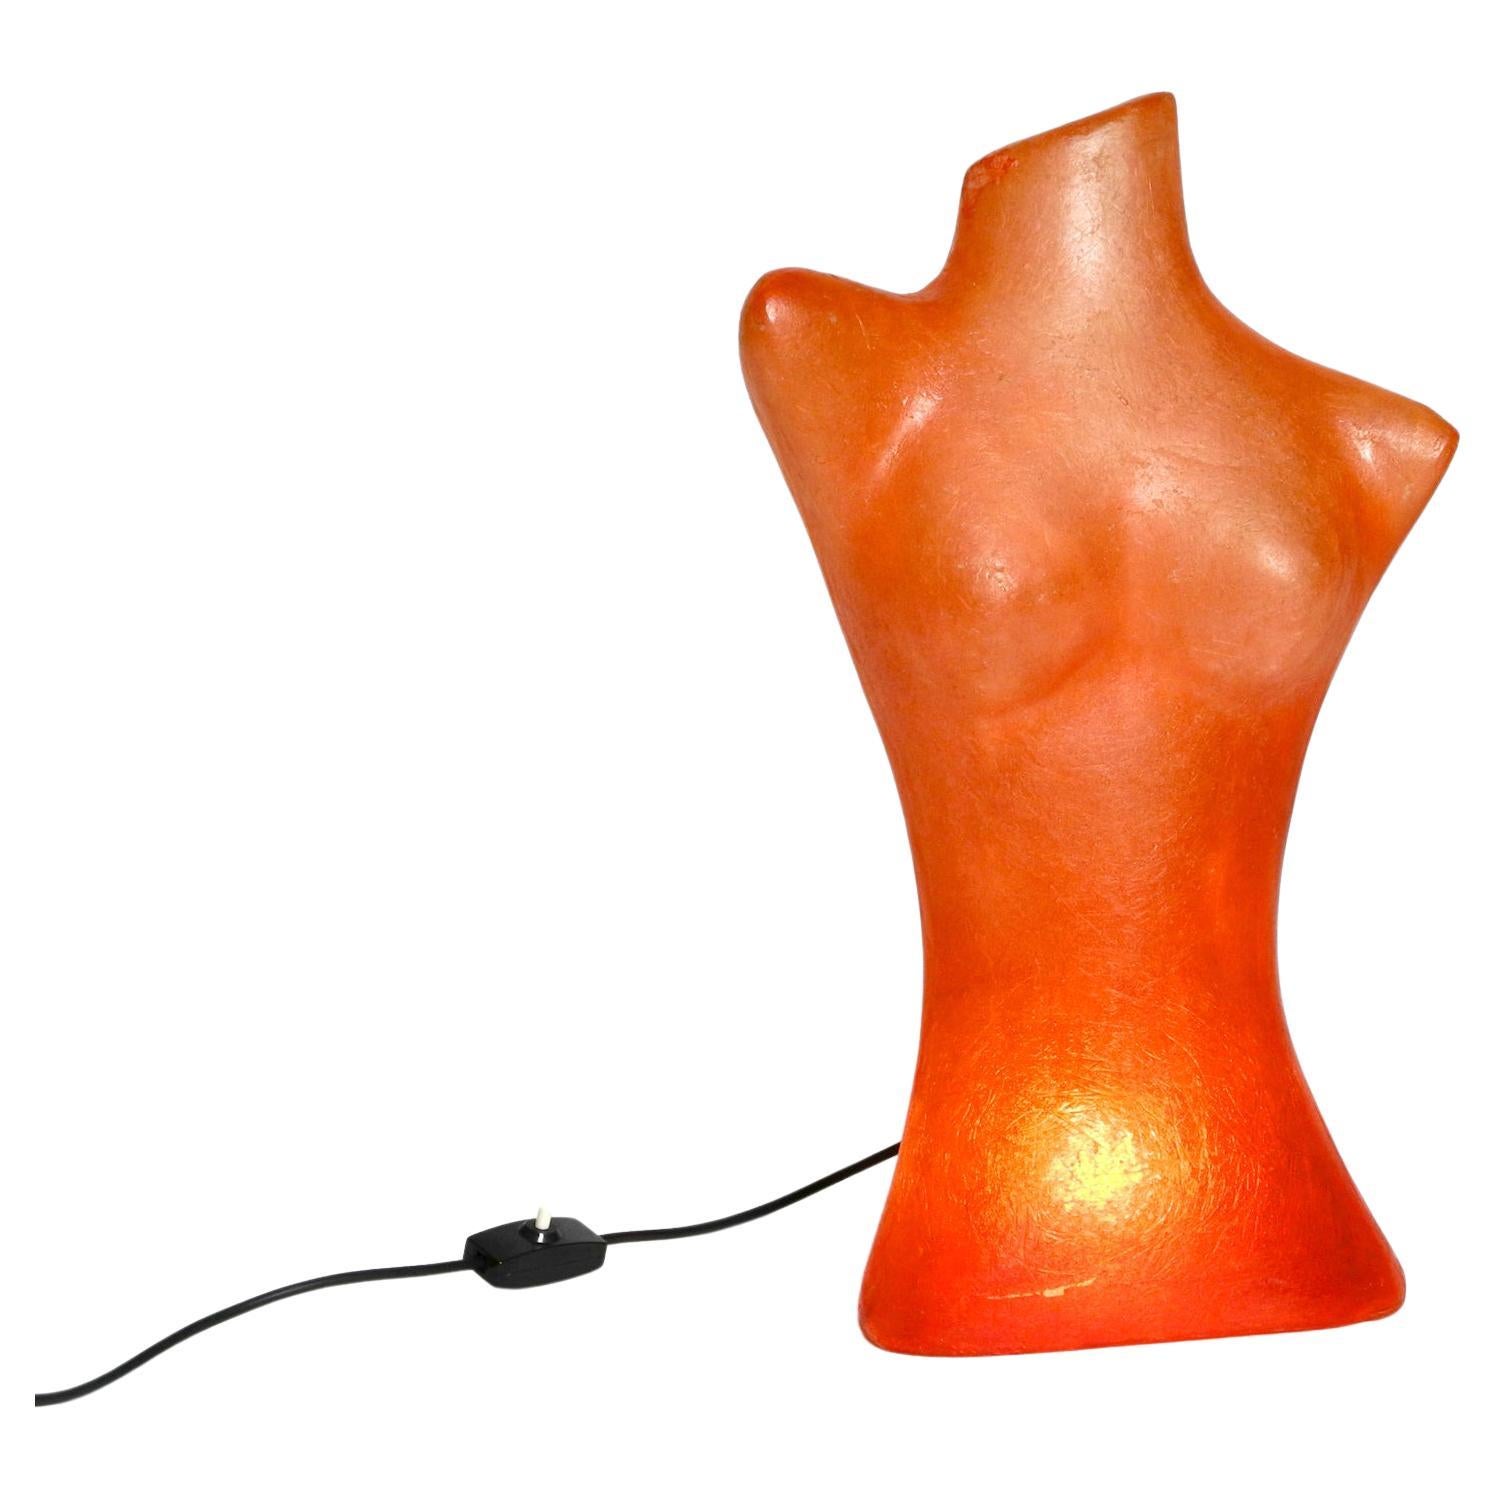 Exceptional 1960s Woman Torso Table Lamp Made of Fiberglass in Red For Sale